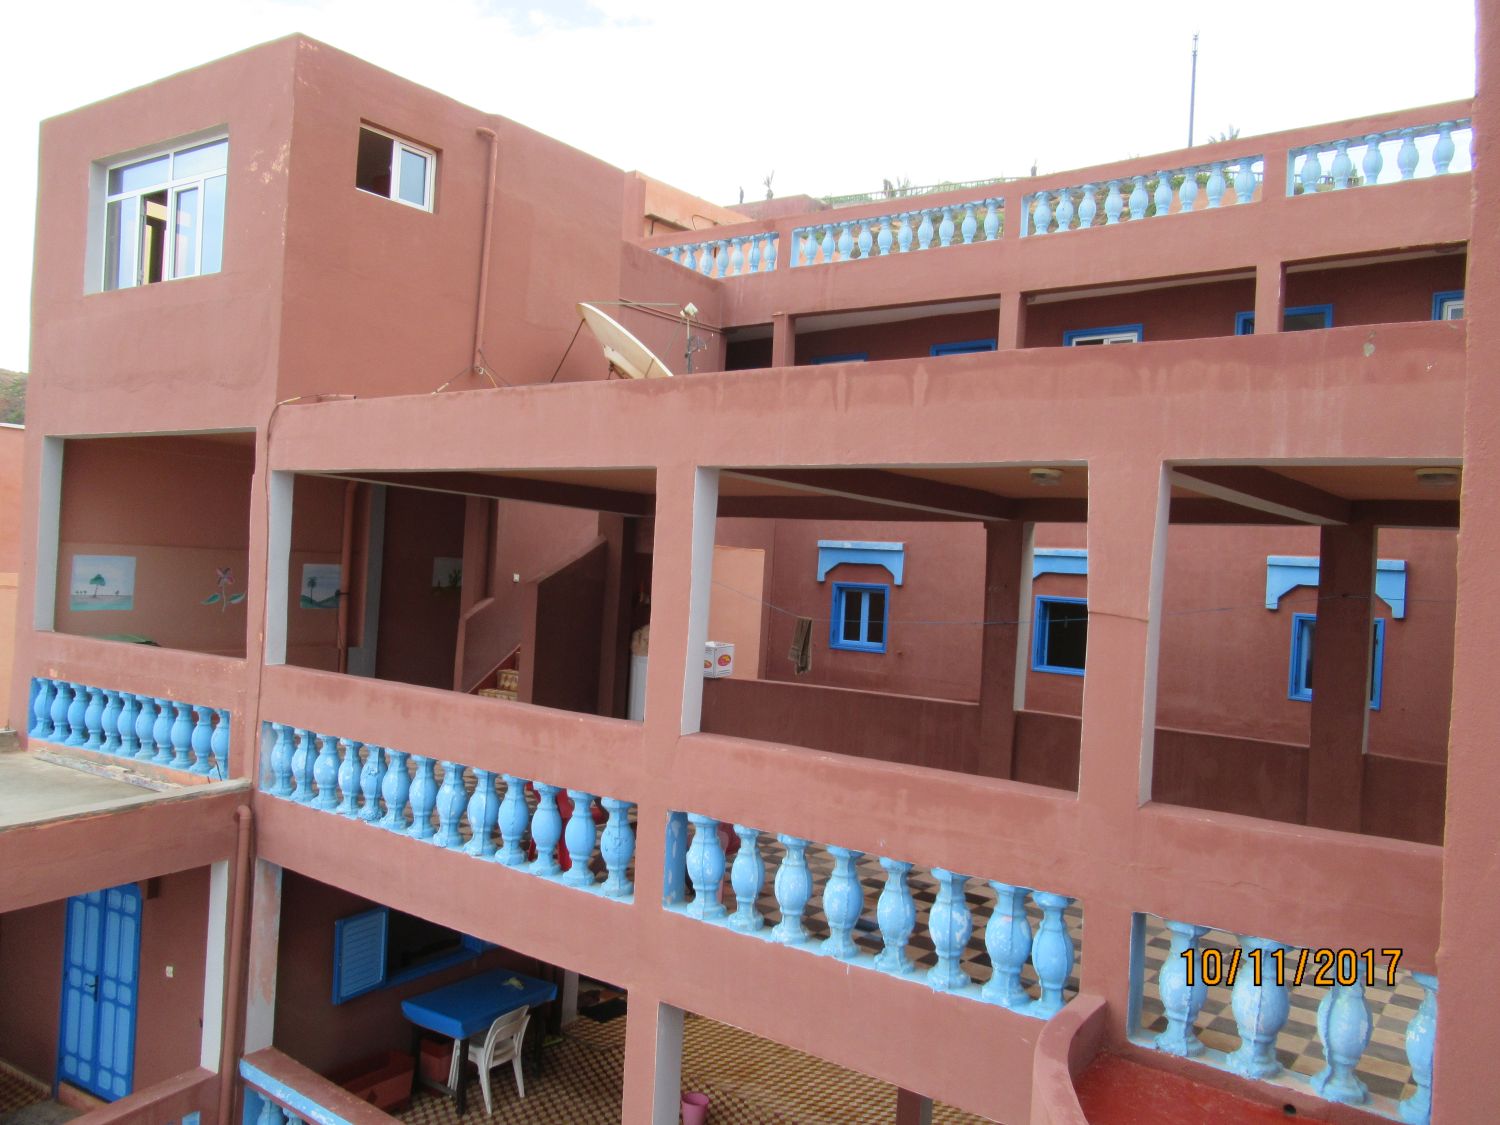 View of hostel